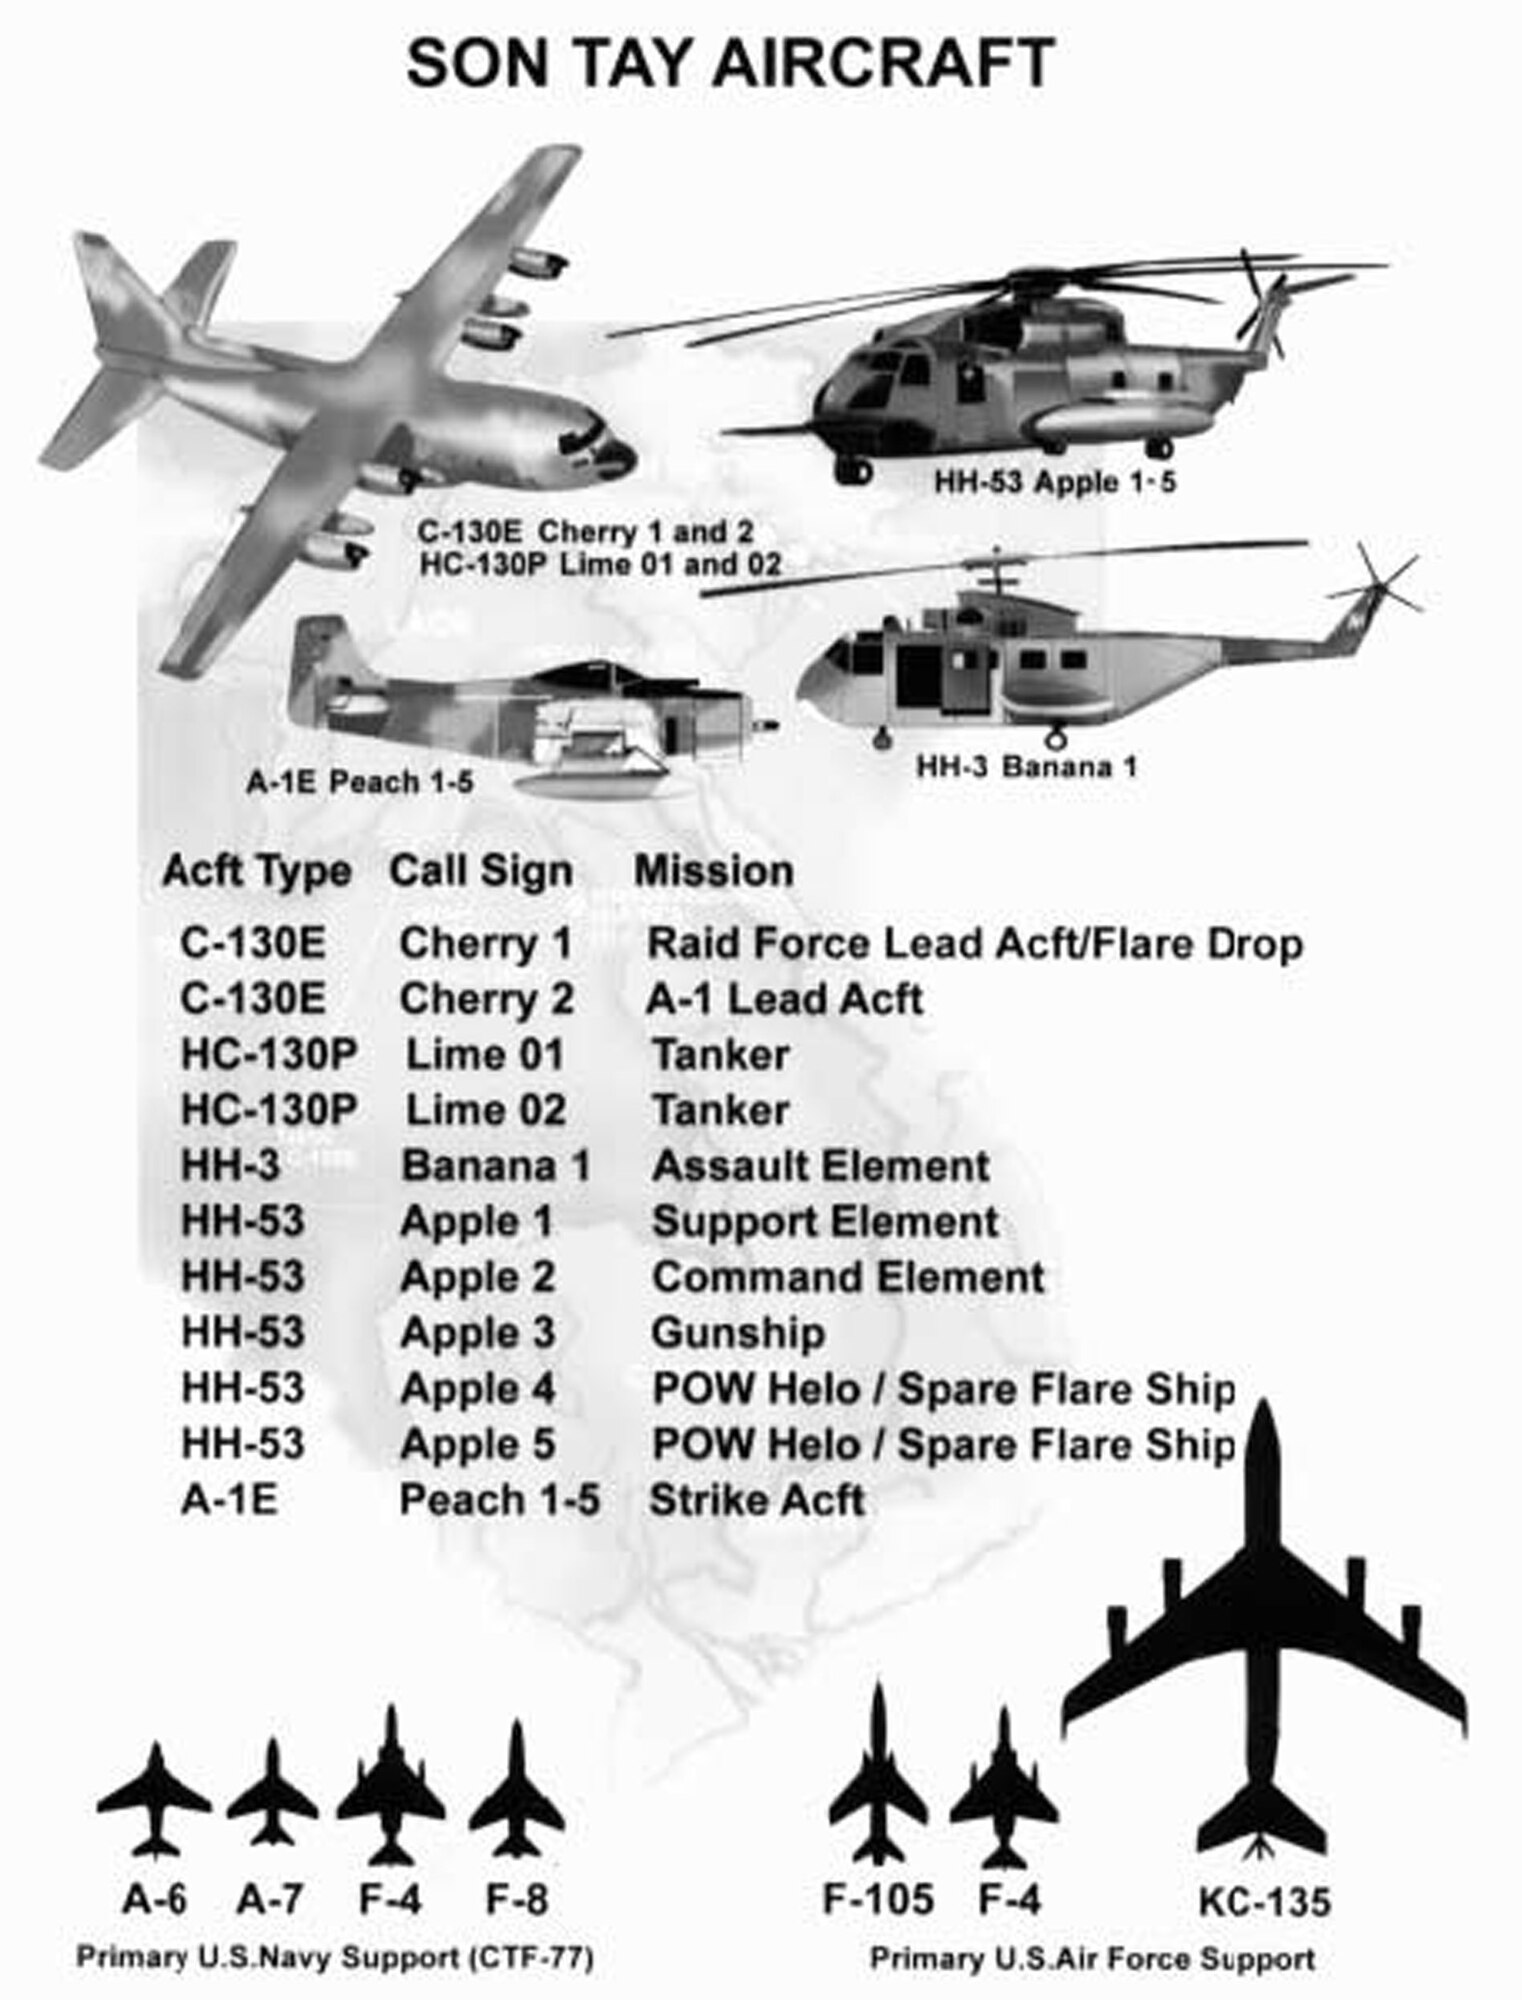 Son Tay rescue force aircraft composition. (Courtesy graphic)
